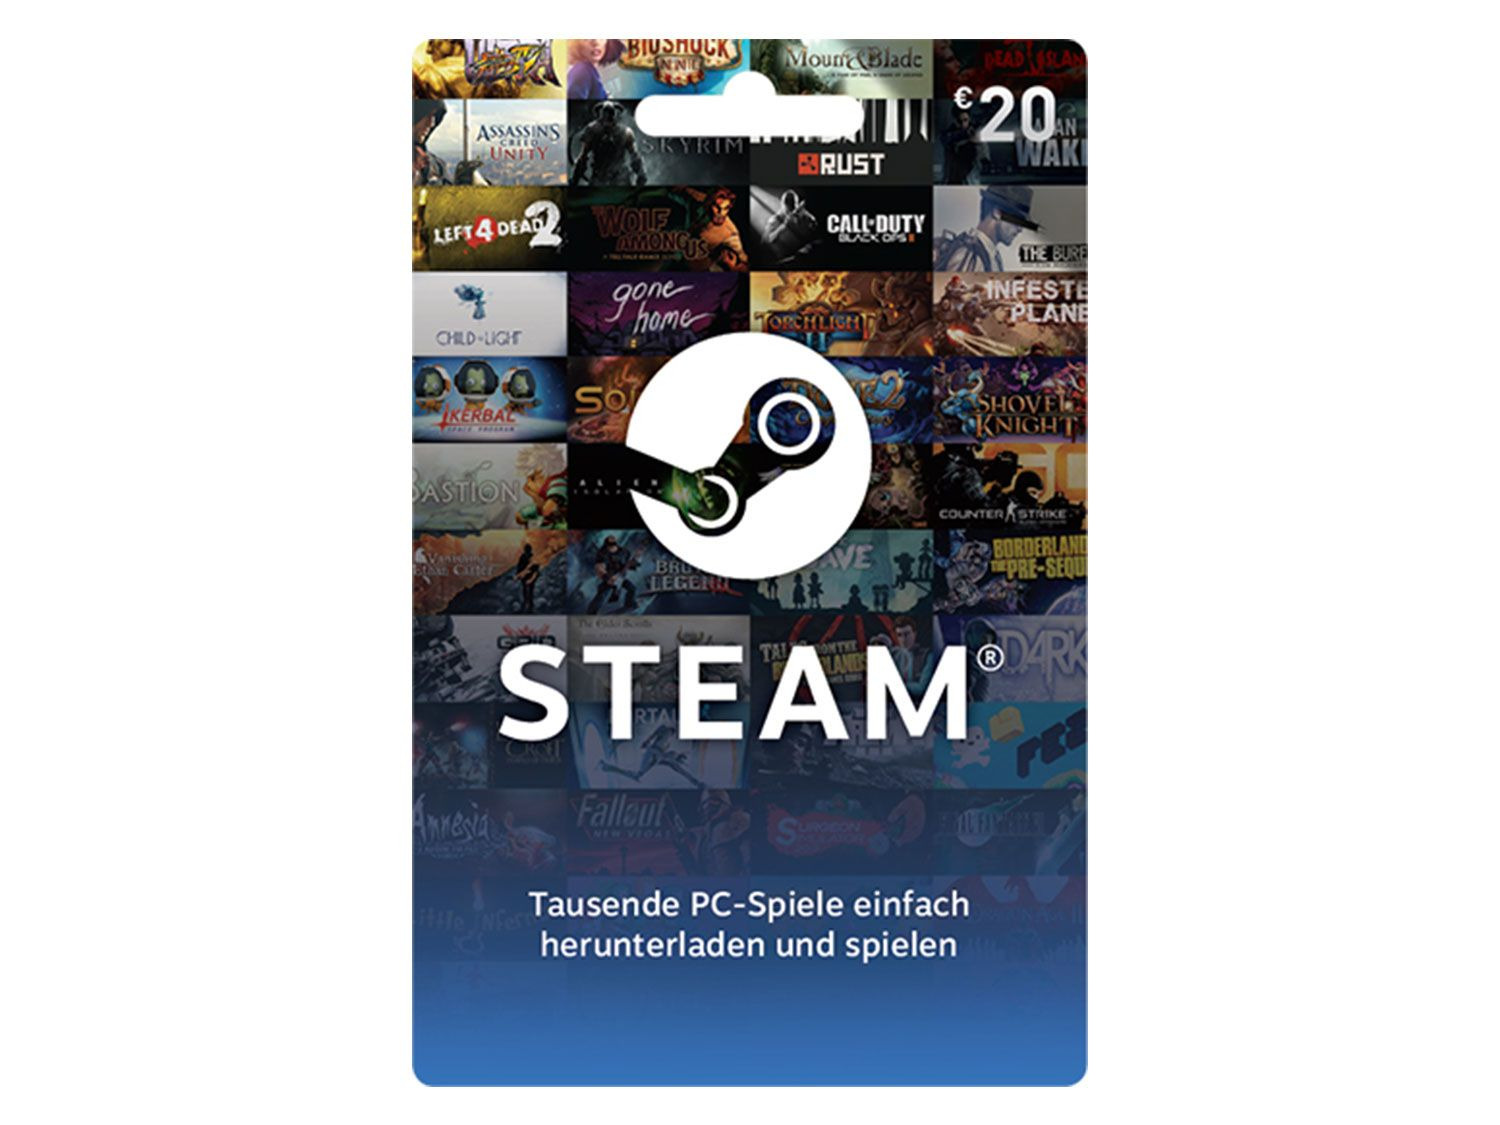 Value of steam фото 92